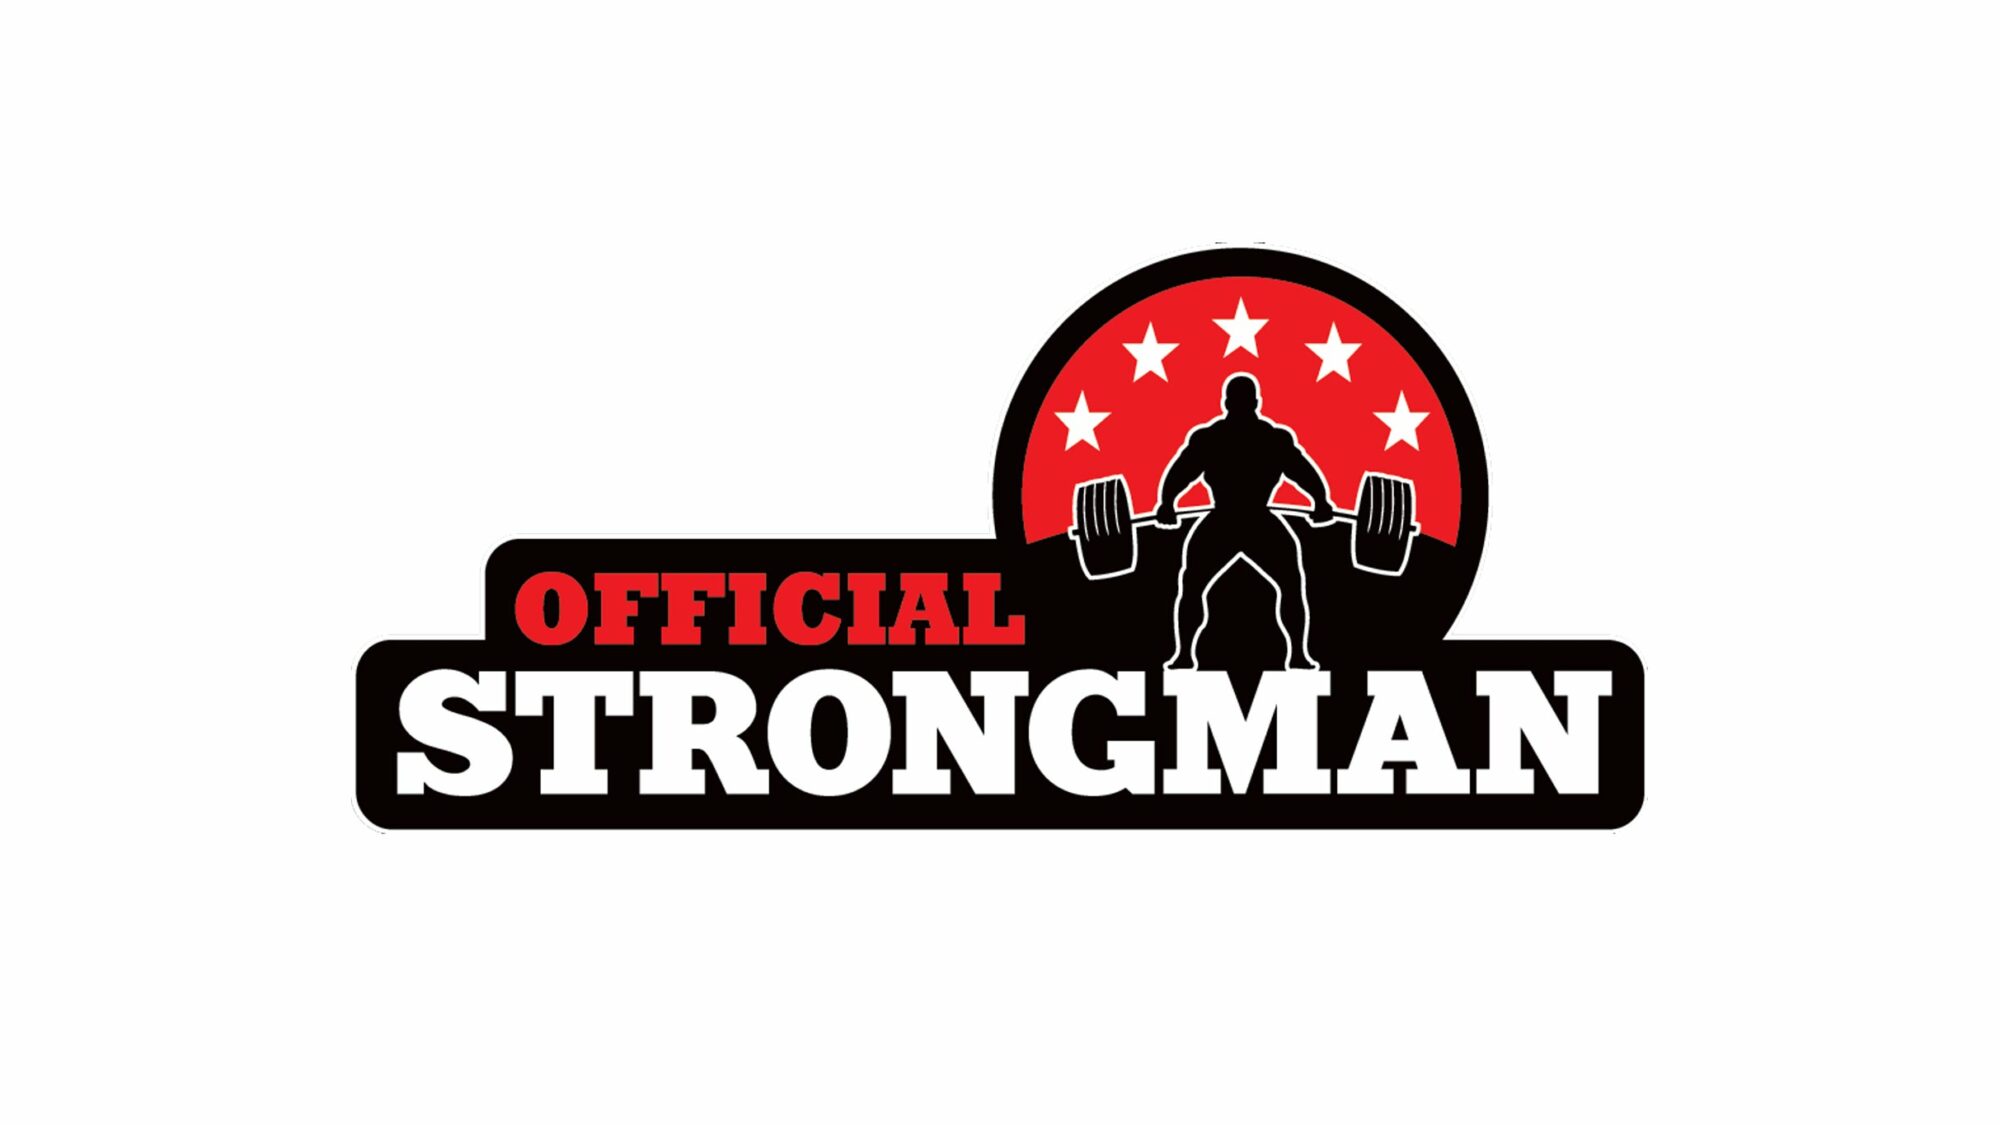 Image name Official Strongman European Championships Weekend Ticket at York Barbican York the 1 image from the post Official Strongman European Championships Day Ticket - Sunday at York Barbican, York in Yorkshire.com.